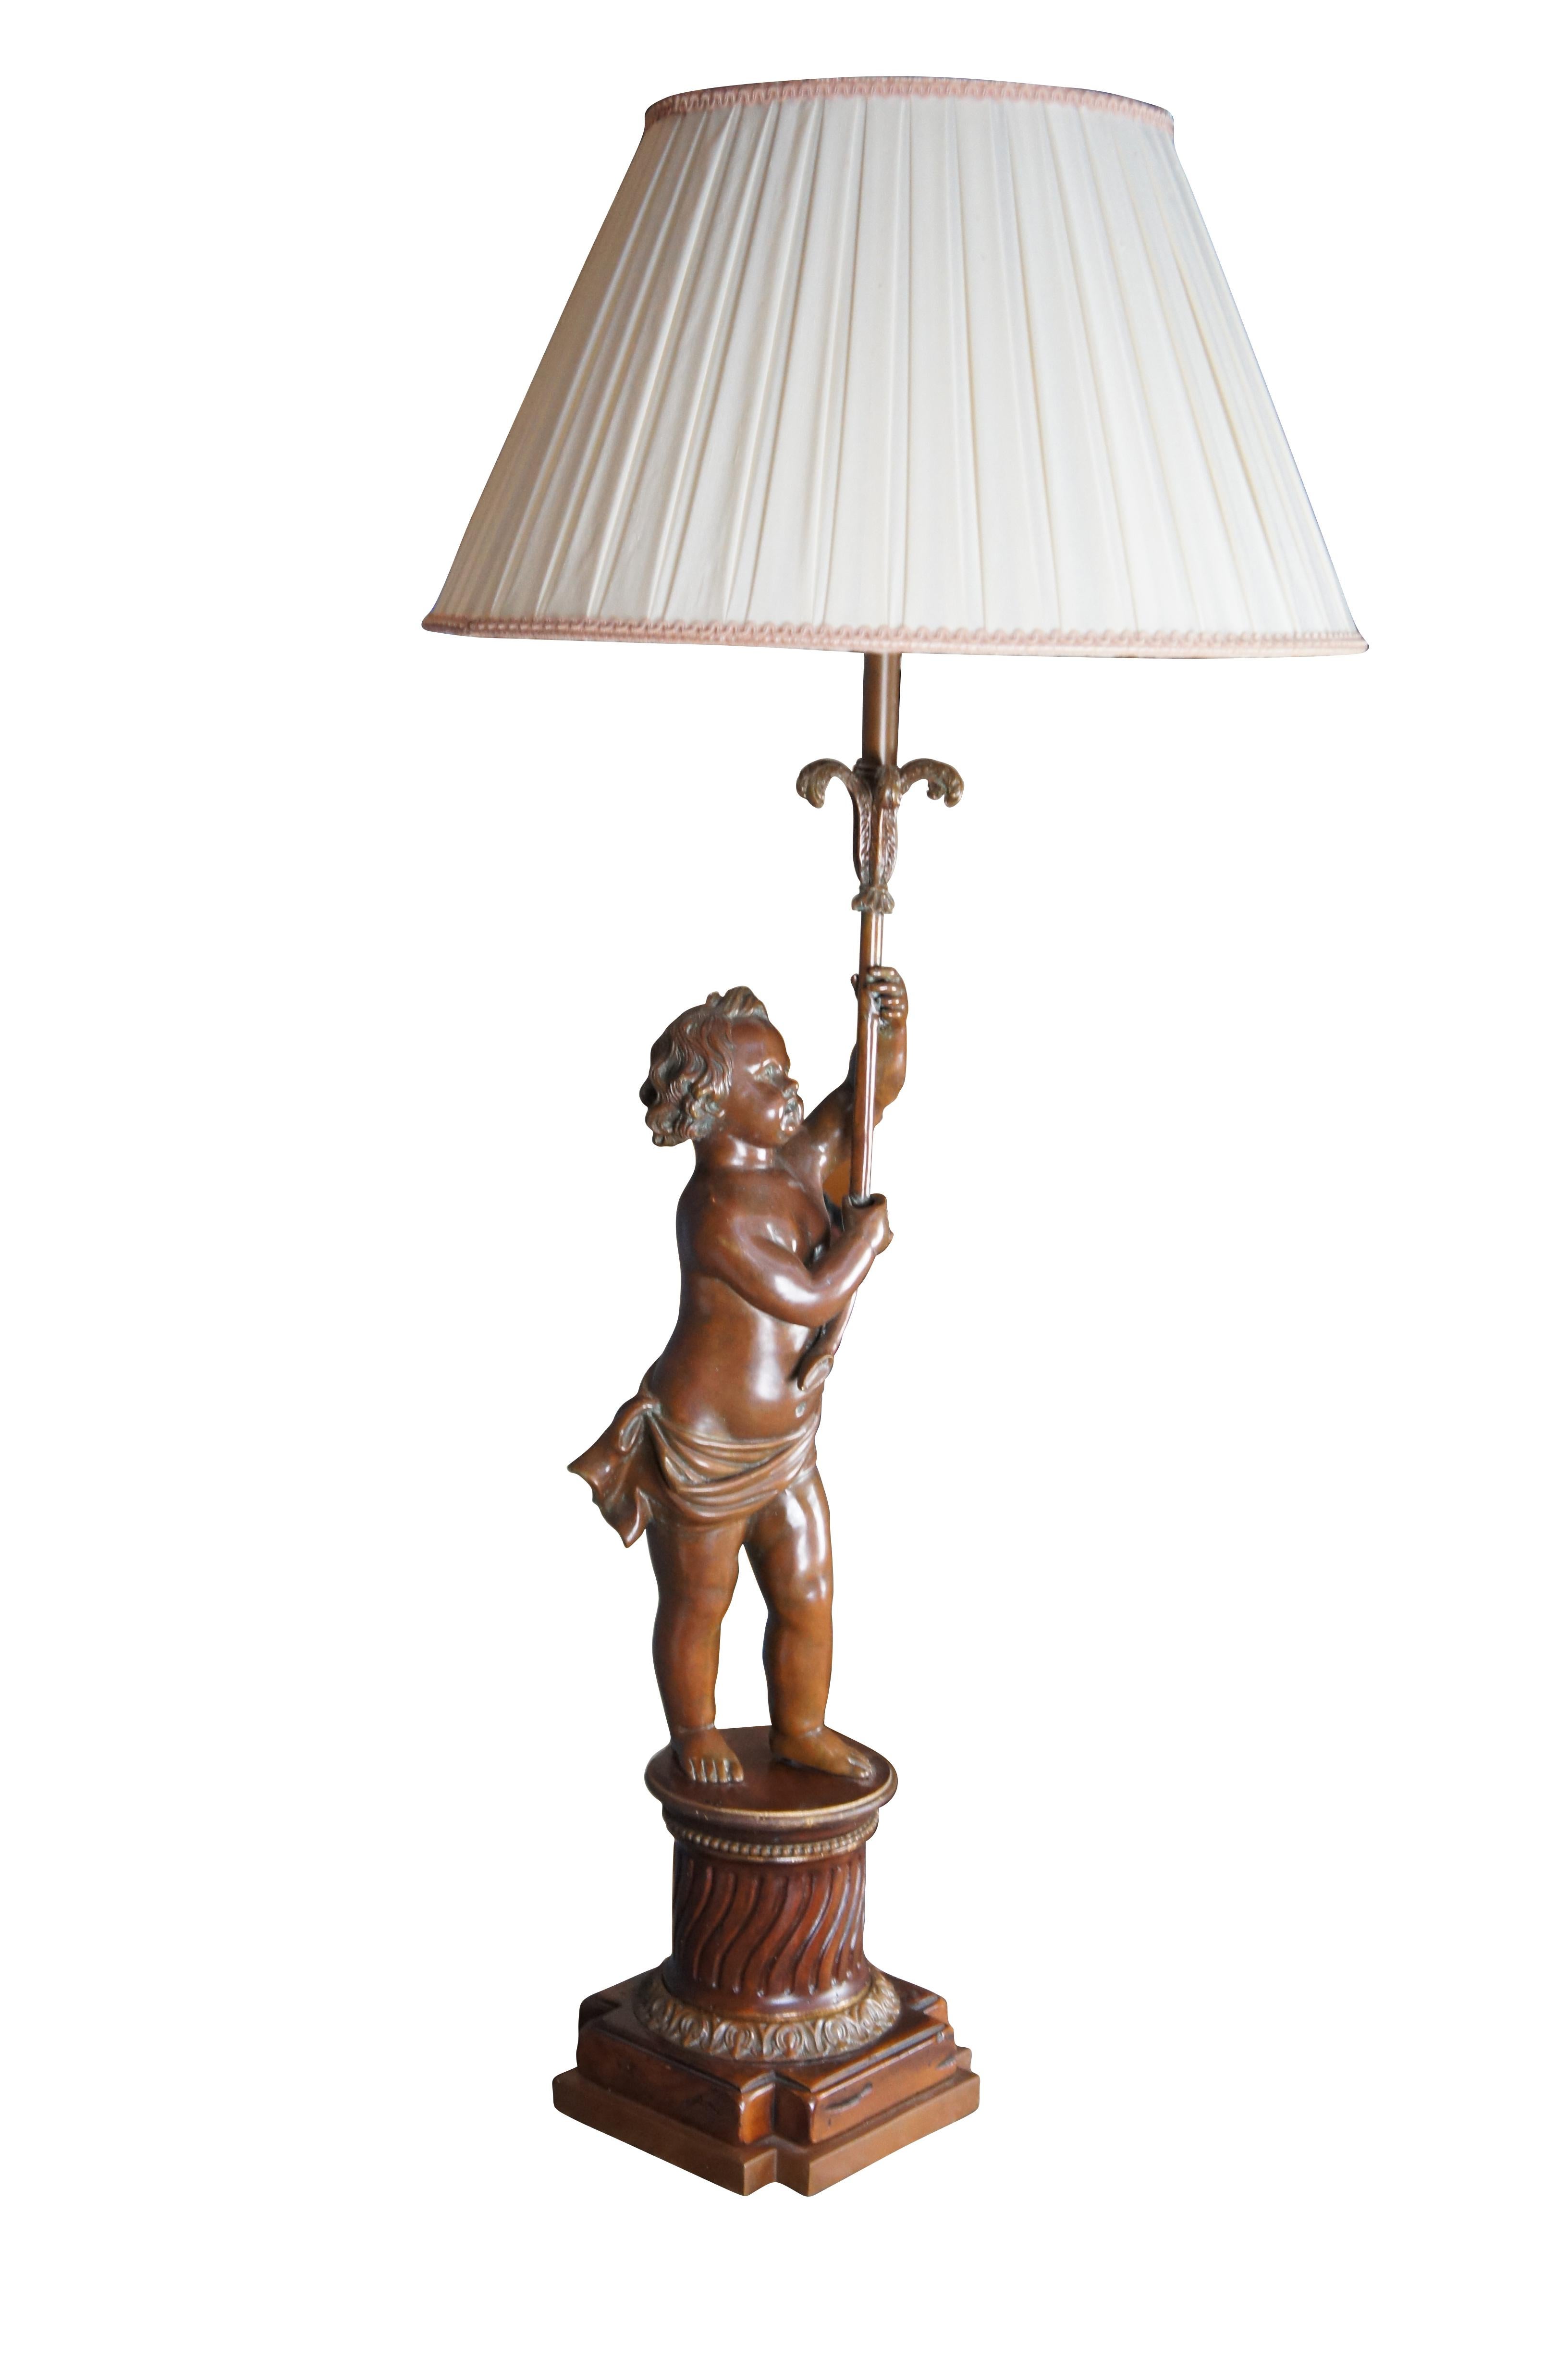 A beautiful French Art Nouveau style lamp, circa late 20th century. Features a bronze cherub holding an ornate Prince of Whales style candlestick over a Carved mahogany base. The base is Grecian style pedestal or stand with beading, fluting and